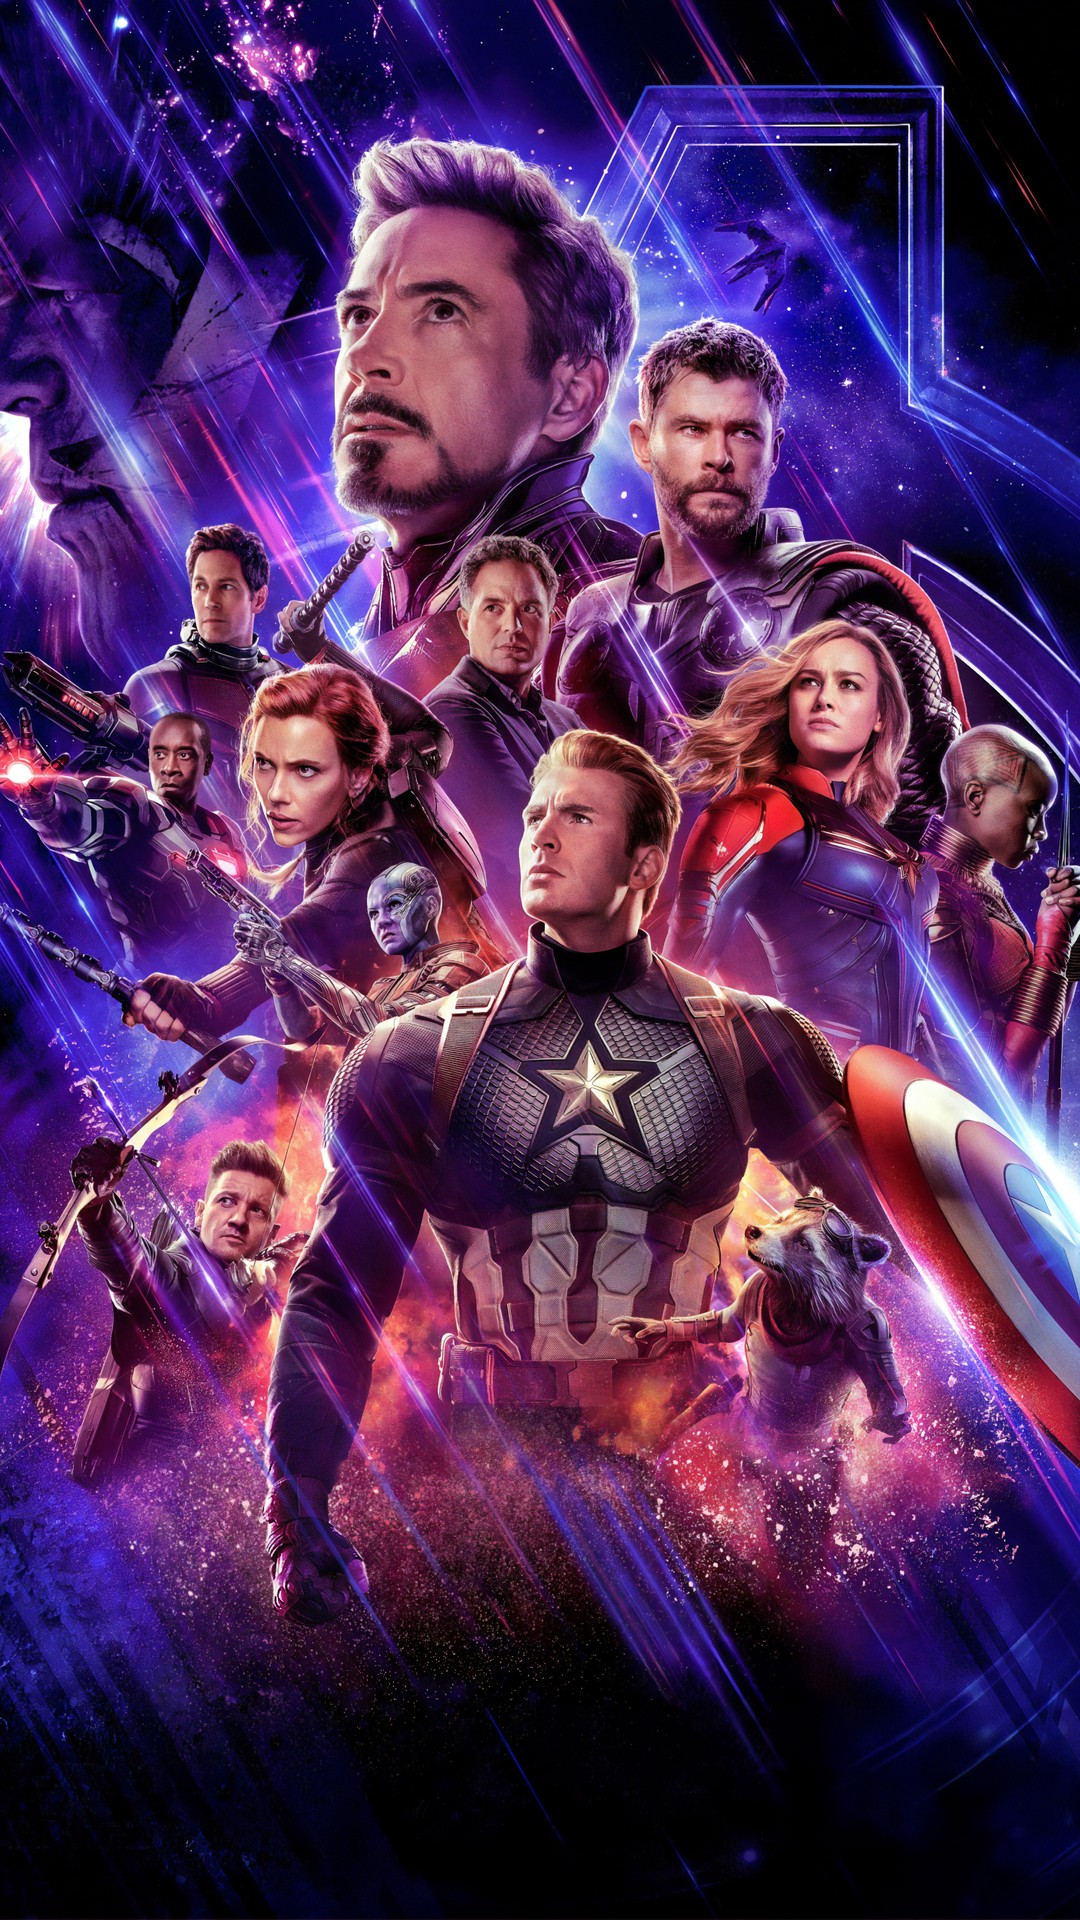 Wallpaper Mobile Avengers Endgame 2019 with high-resolution 1080x1920 pixel. You can use this poster wallpaper for your Desktop Computers, Mac Screensavers, Windows Backgrounds, iPhone Wallpapers, Tablet or Android Lock screen and another Mobile device